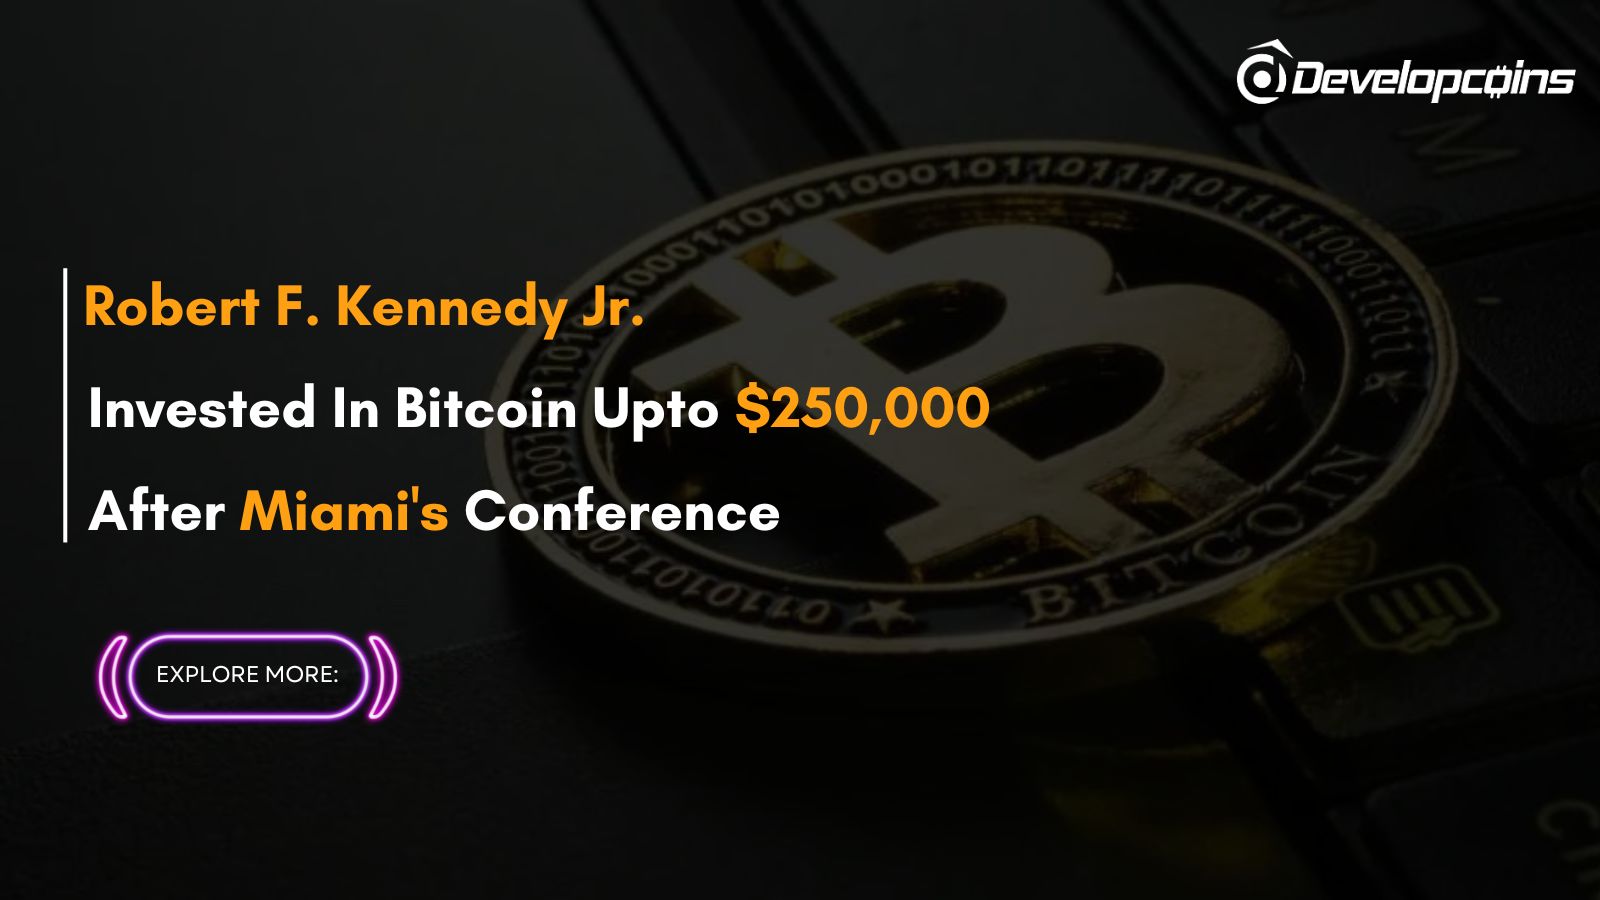 Robert F. Kennedy Jr Invested Upto $250,000 In Bitcoin: A Surprising Move After Miami's Conference